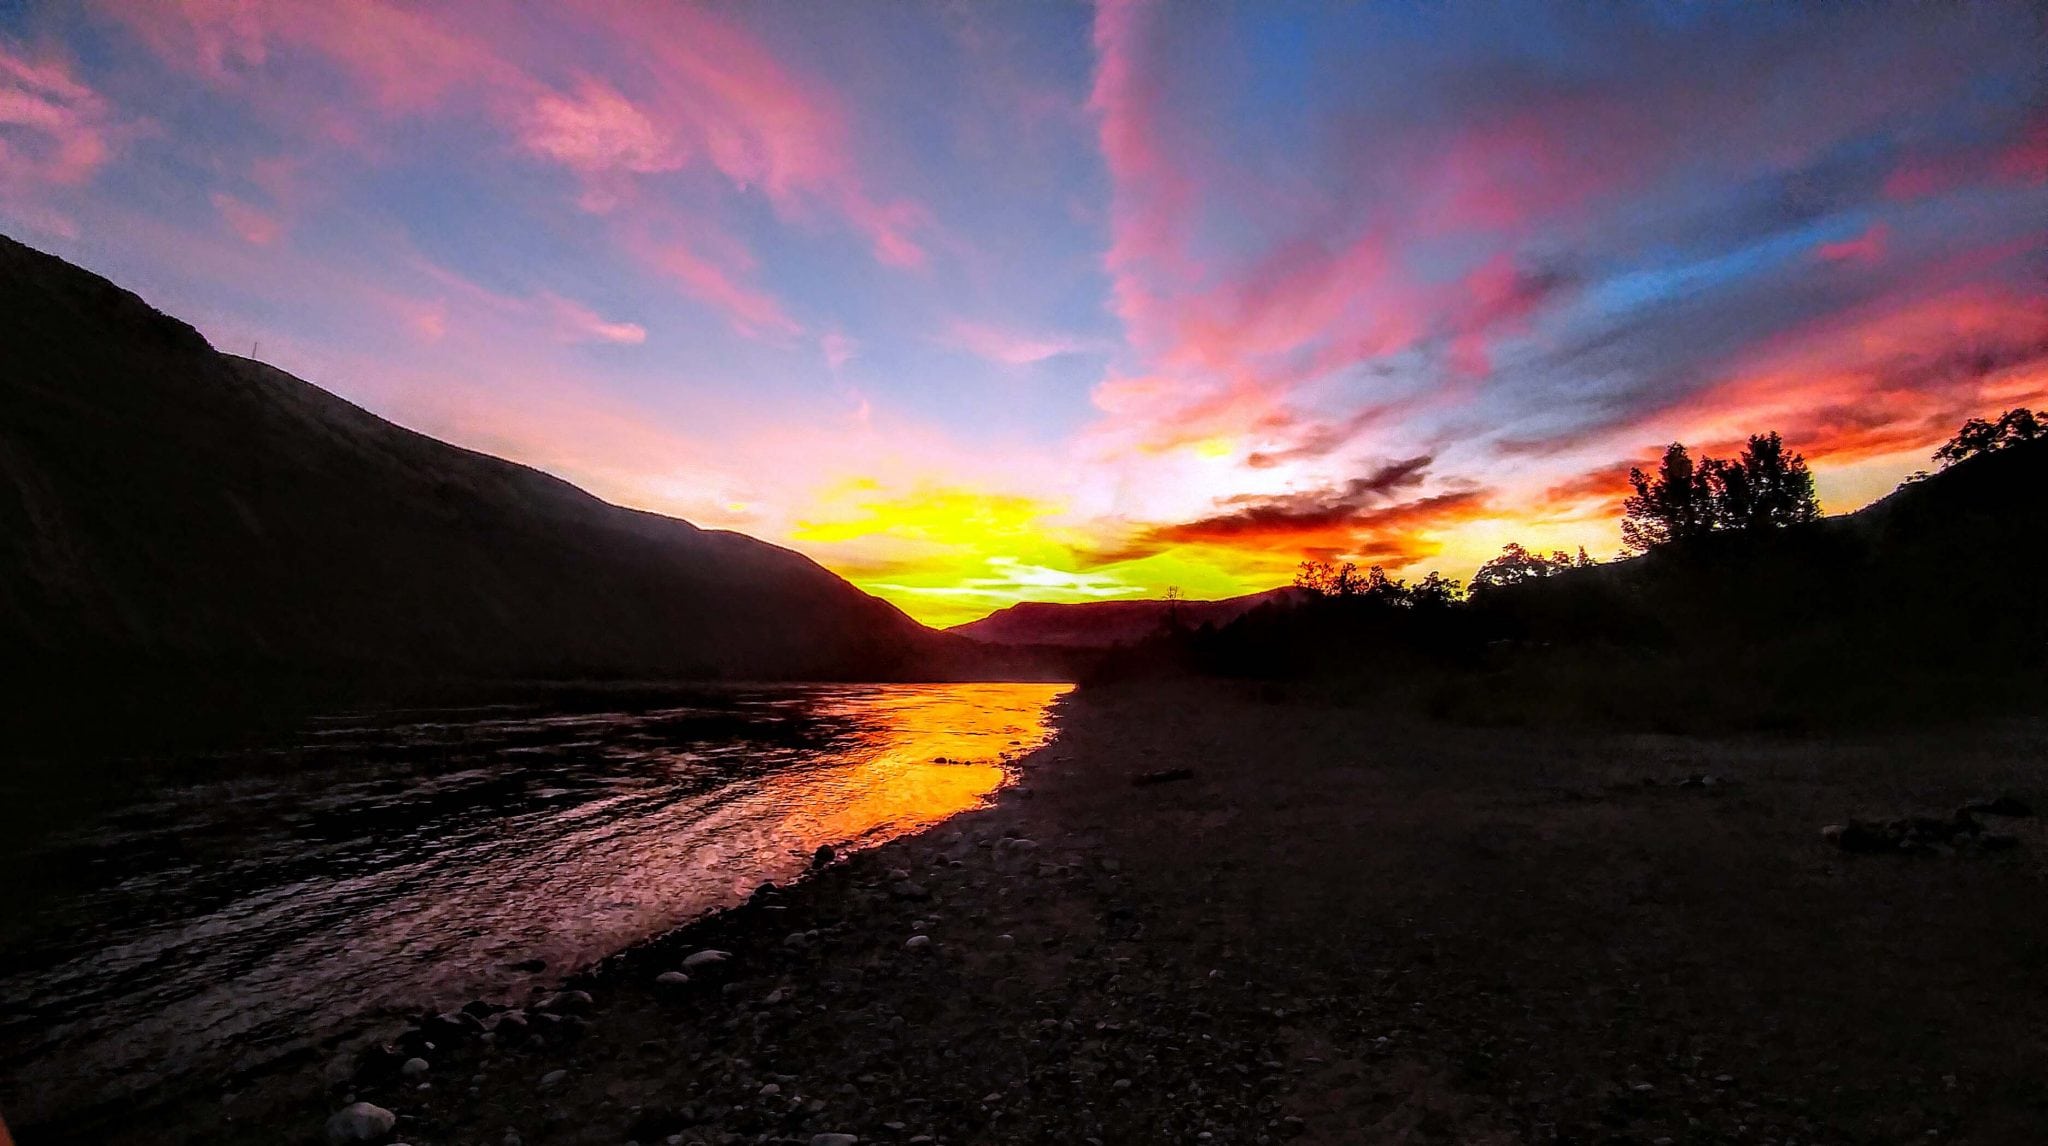 The Sun is setting on the Thompson trout season but there are a few days left